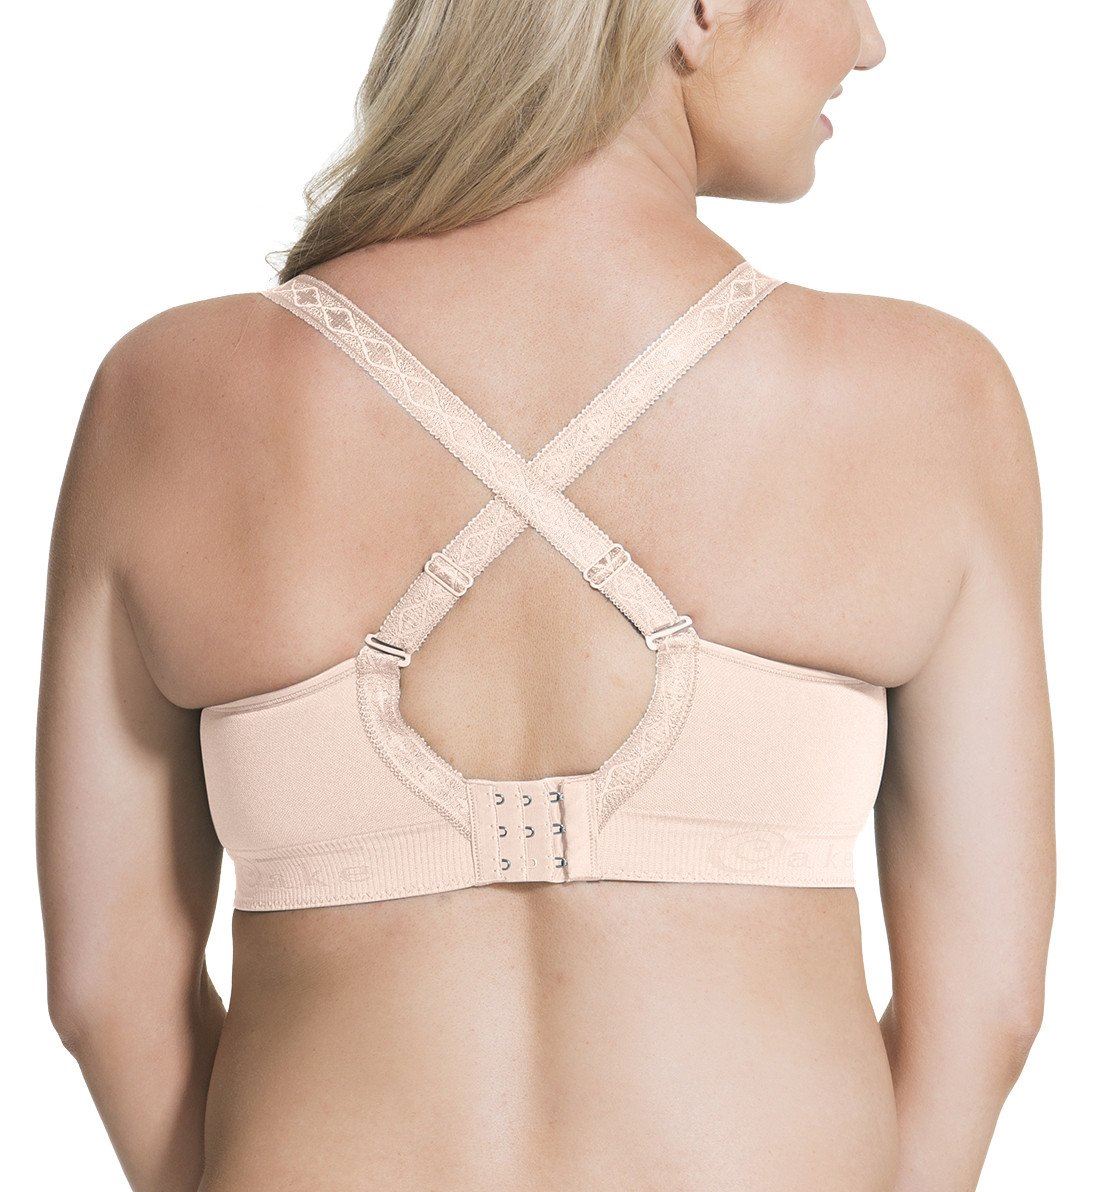 Cake Maternity Popping Candy Nursing Bralette (27-8005),30 XS,Nude - Nude,XS